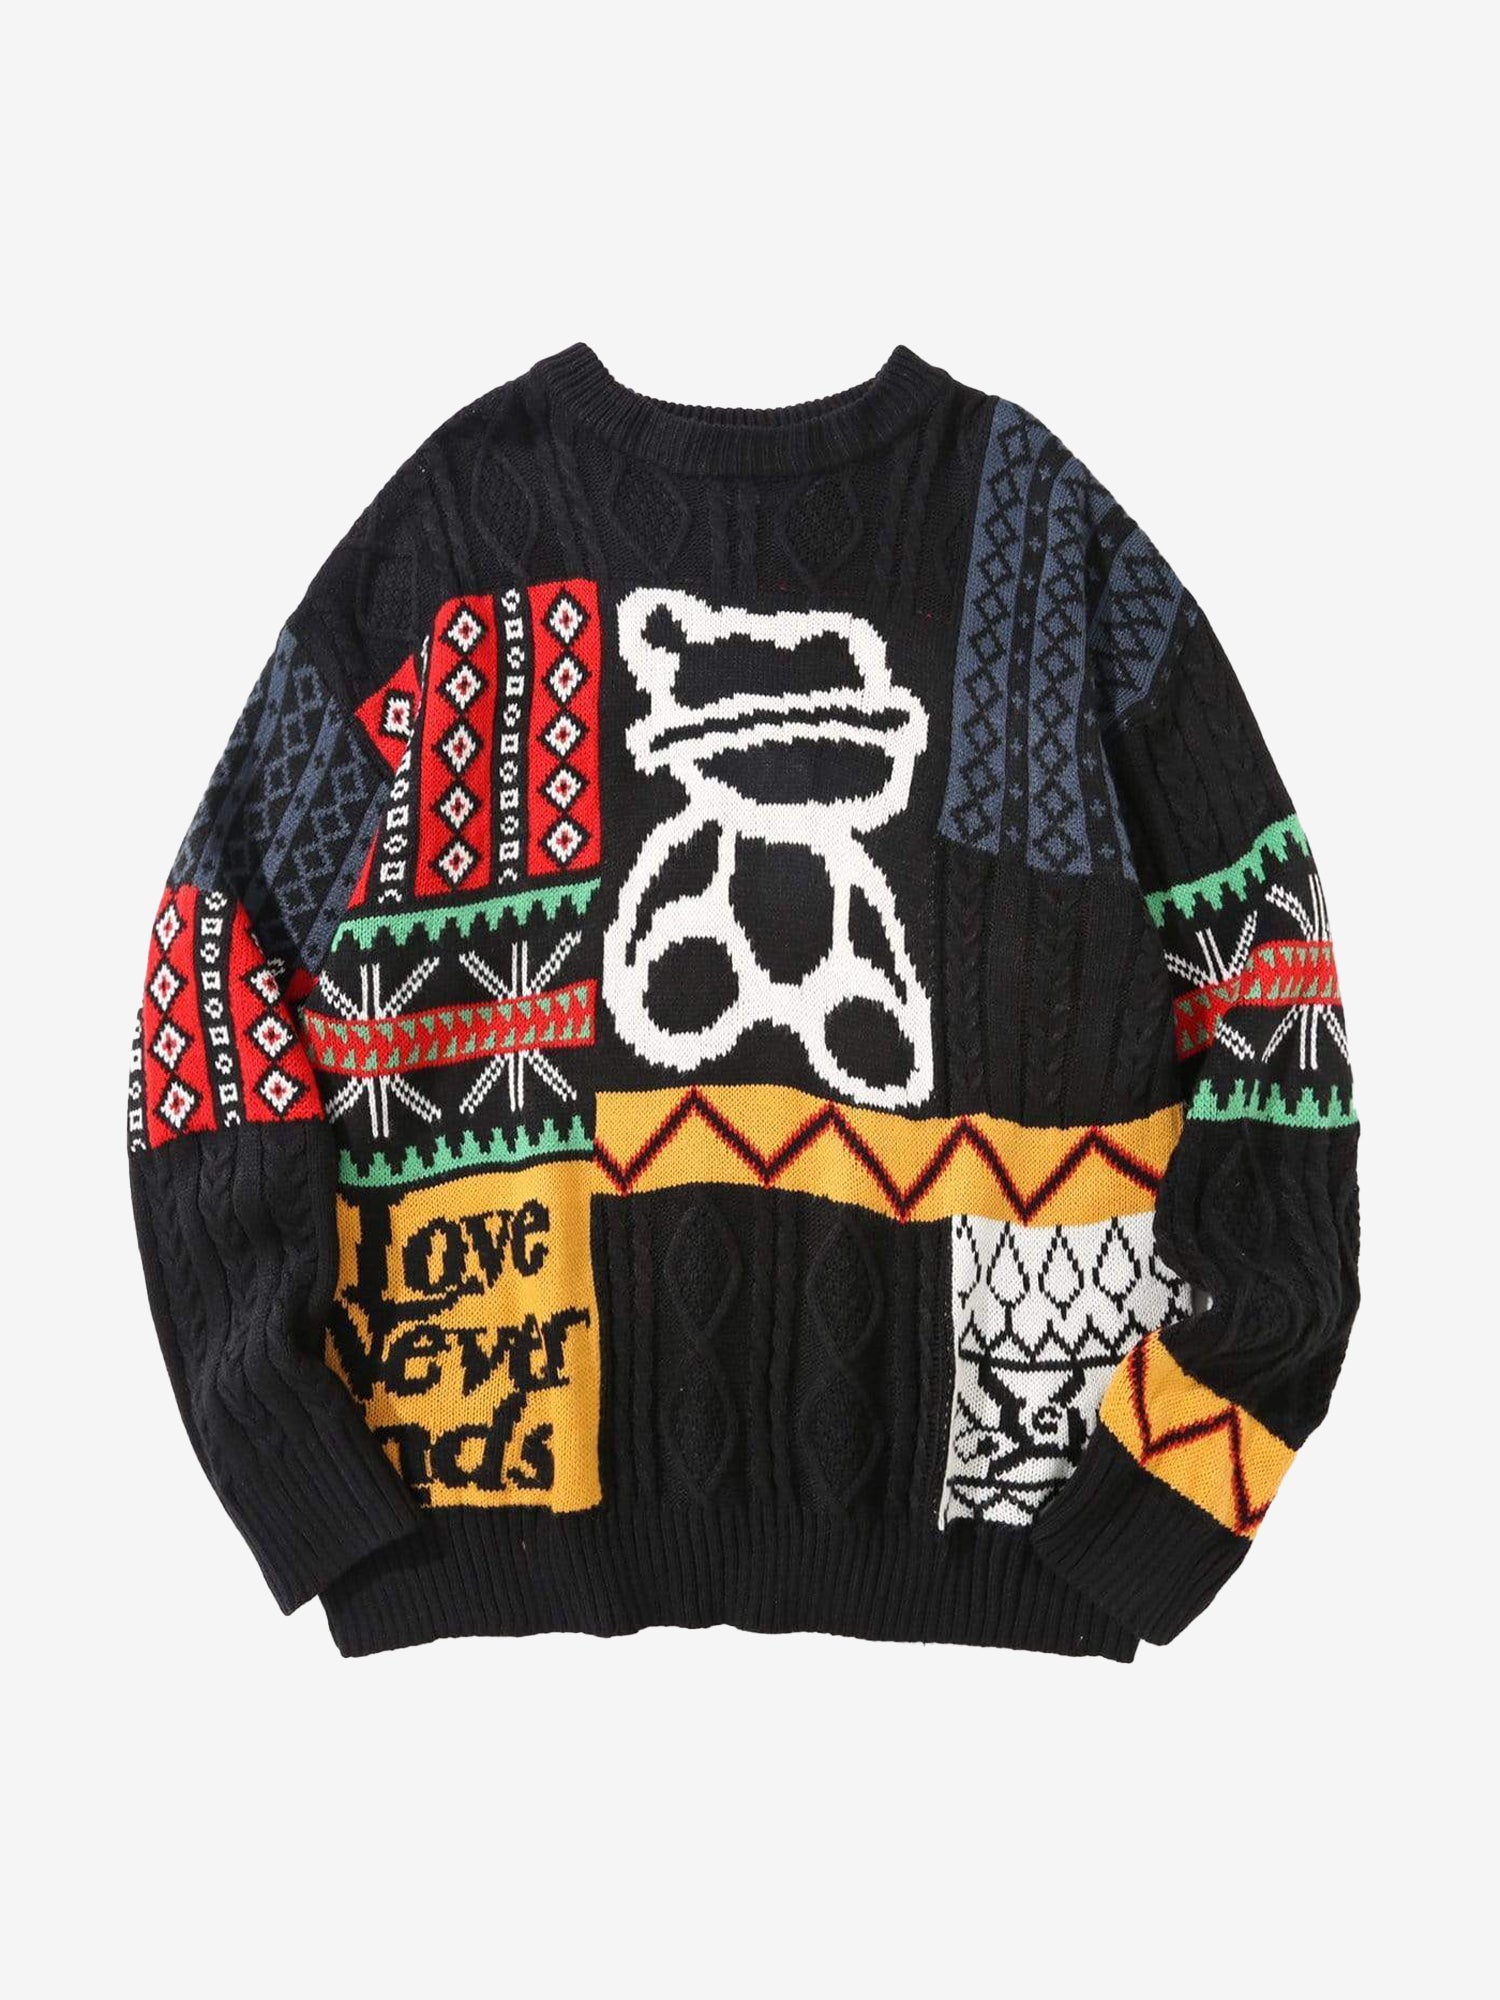 JUSTNOTAG Vintage Color Block Geometric Bear Knitted Sweater